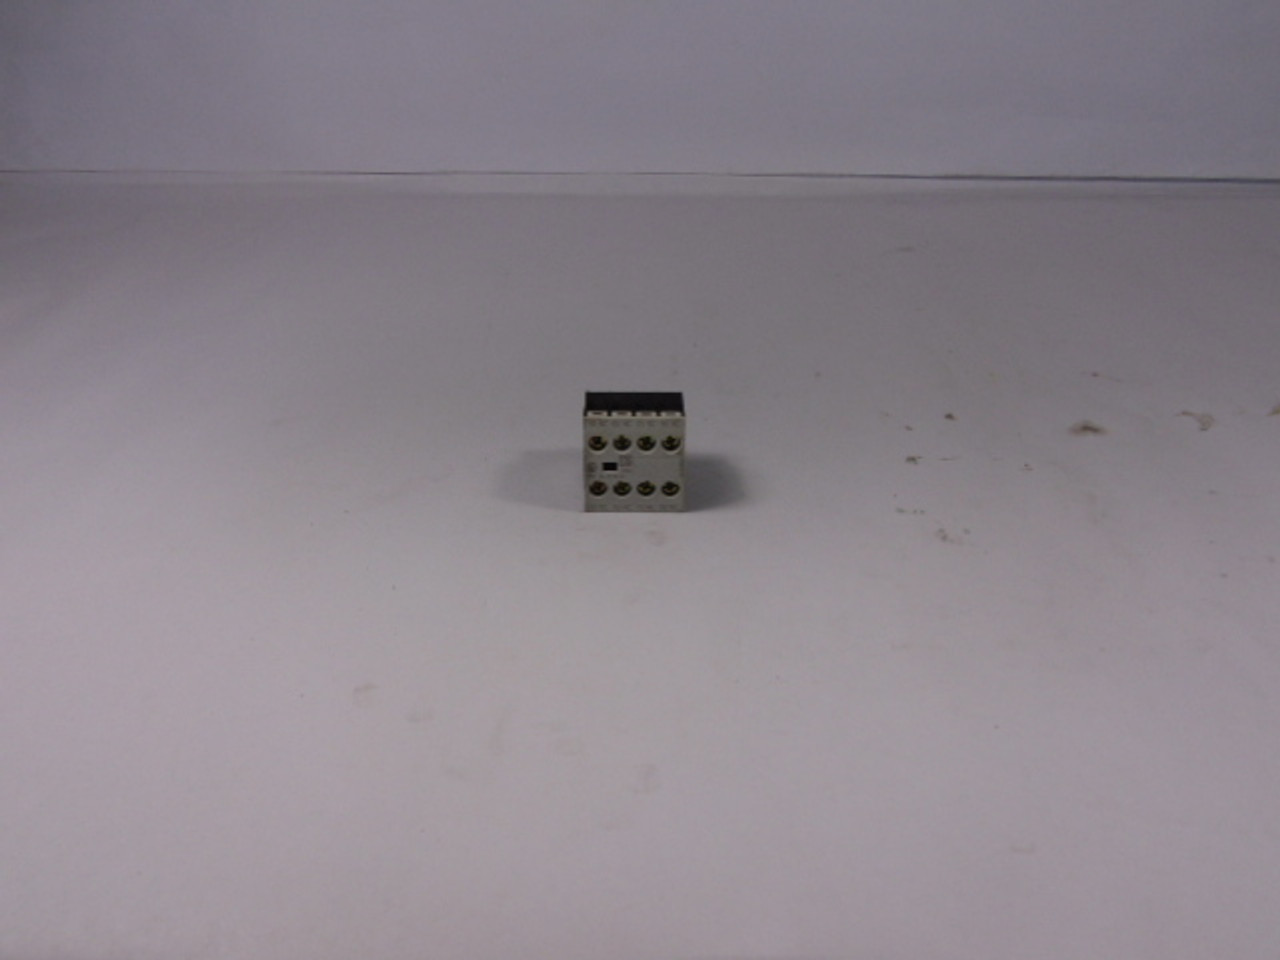 Moeller DILA-XHI04 Miniature Contactor / Relay Accessory USED